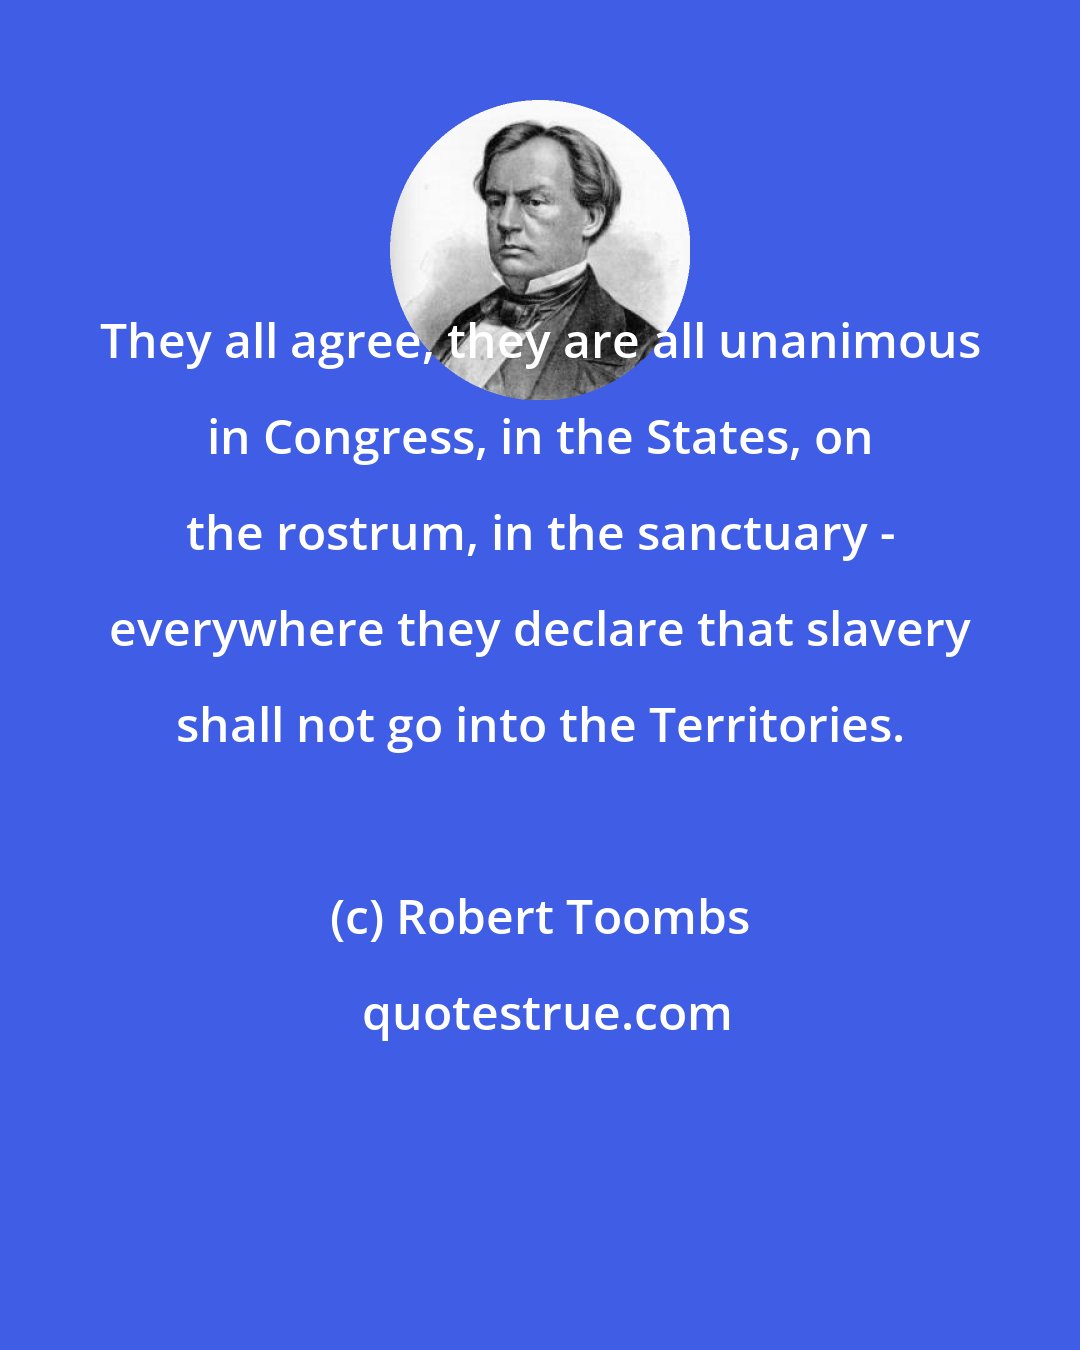 Robert Toombs: They all agree, they are all unanimous in Congress, in the States, on the rostrum, in the sanctuary - everywhere they declare that slavery shall not go into the Territories.